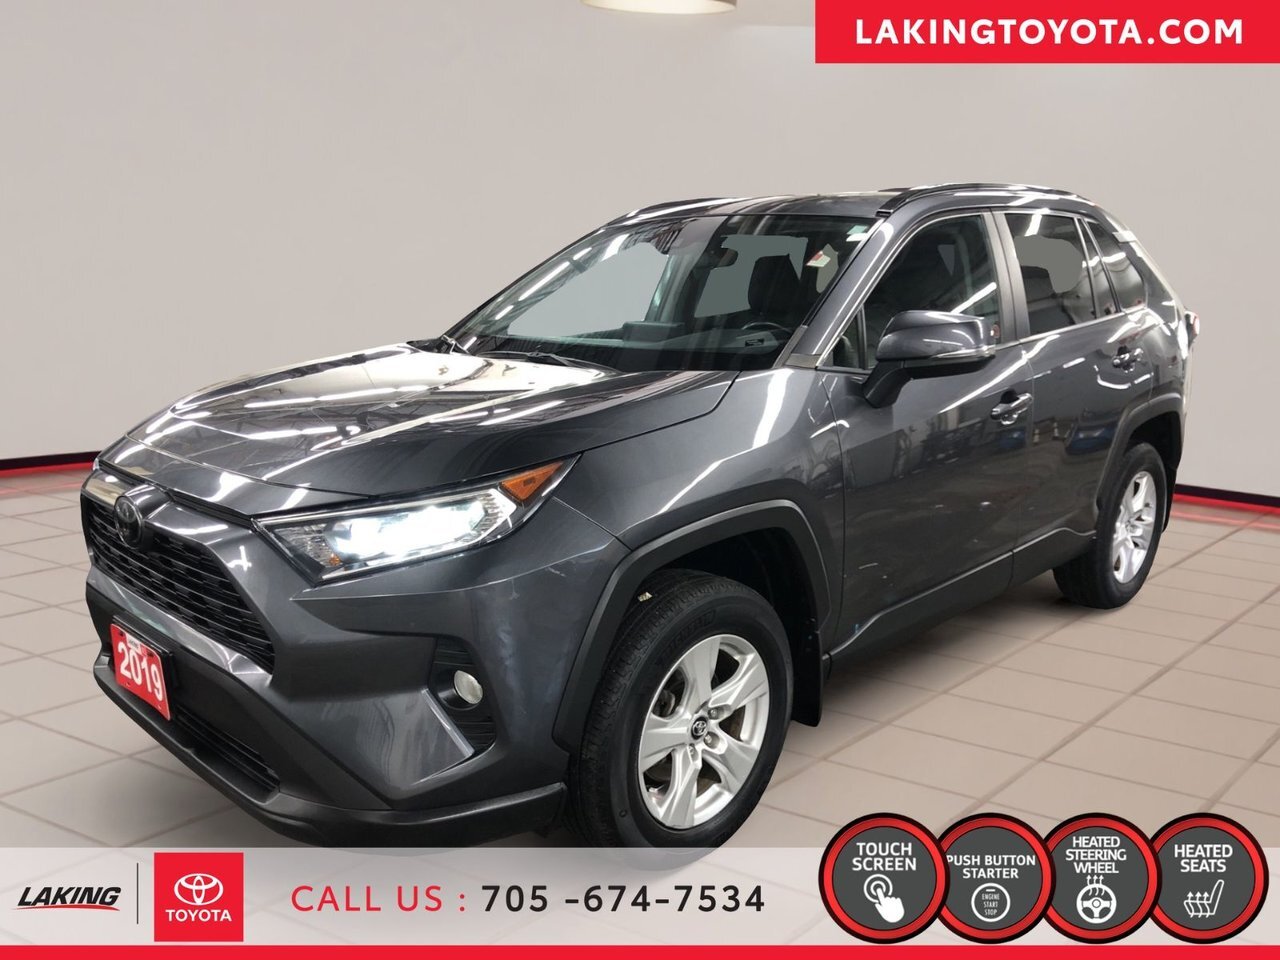 2019 Toyota RAV4 XLE All Wheel Drive Confidence is a SUV with plent